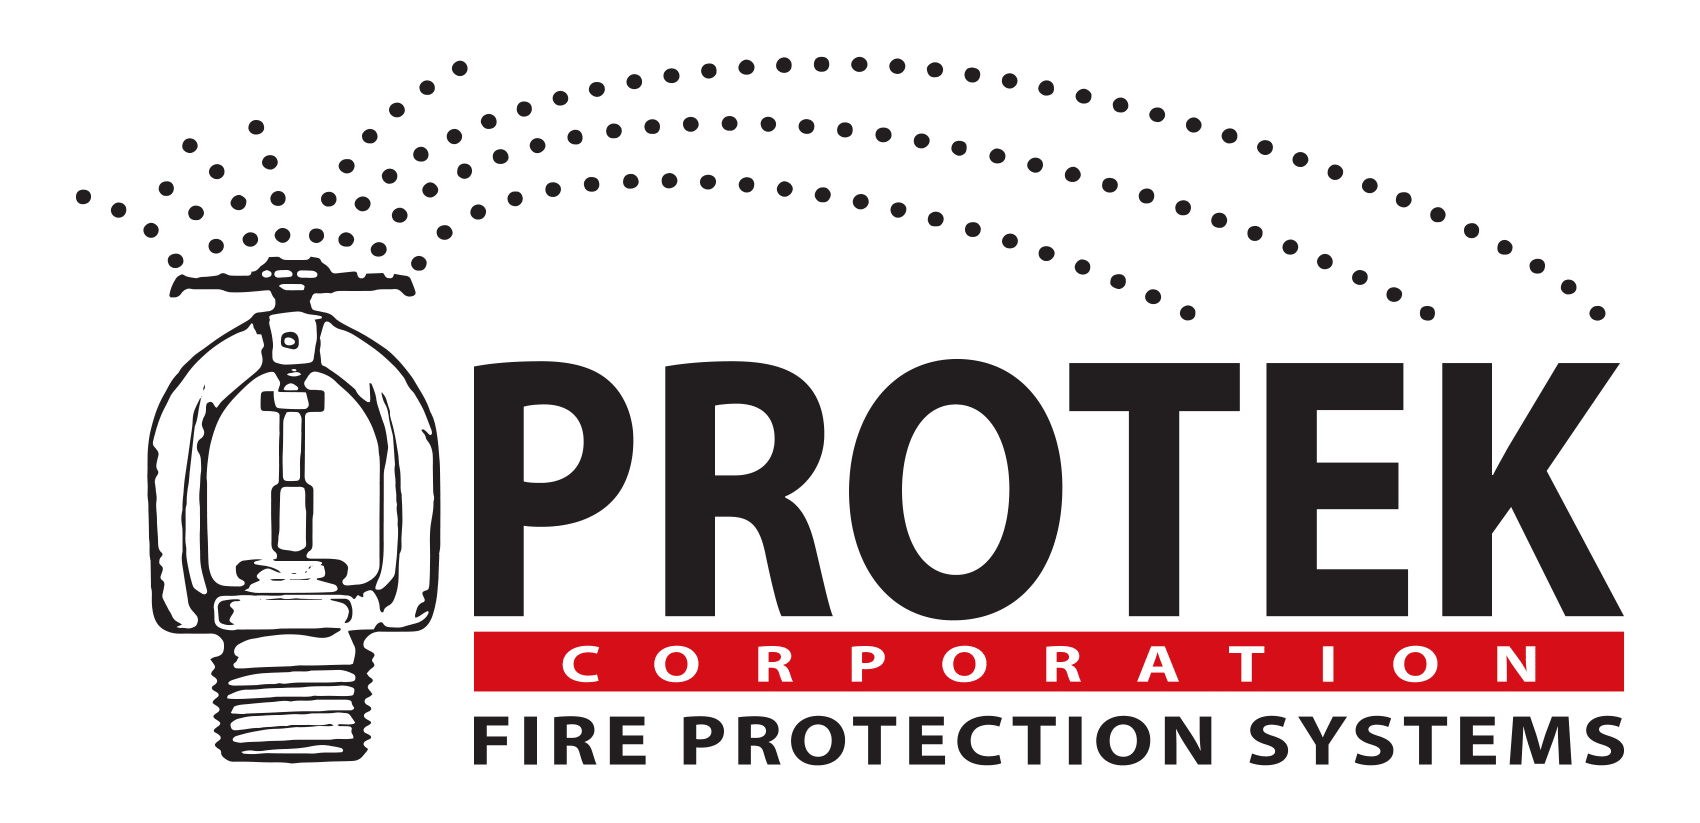 Protek Corporation Fire Protection Systems